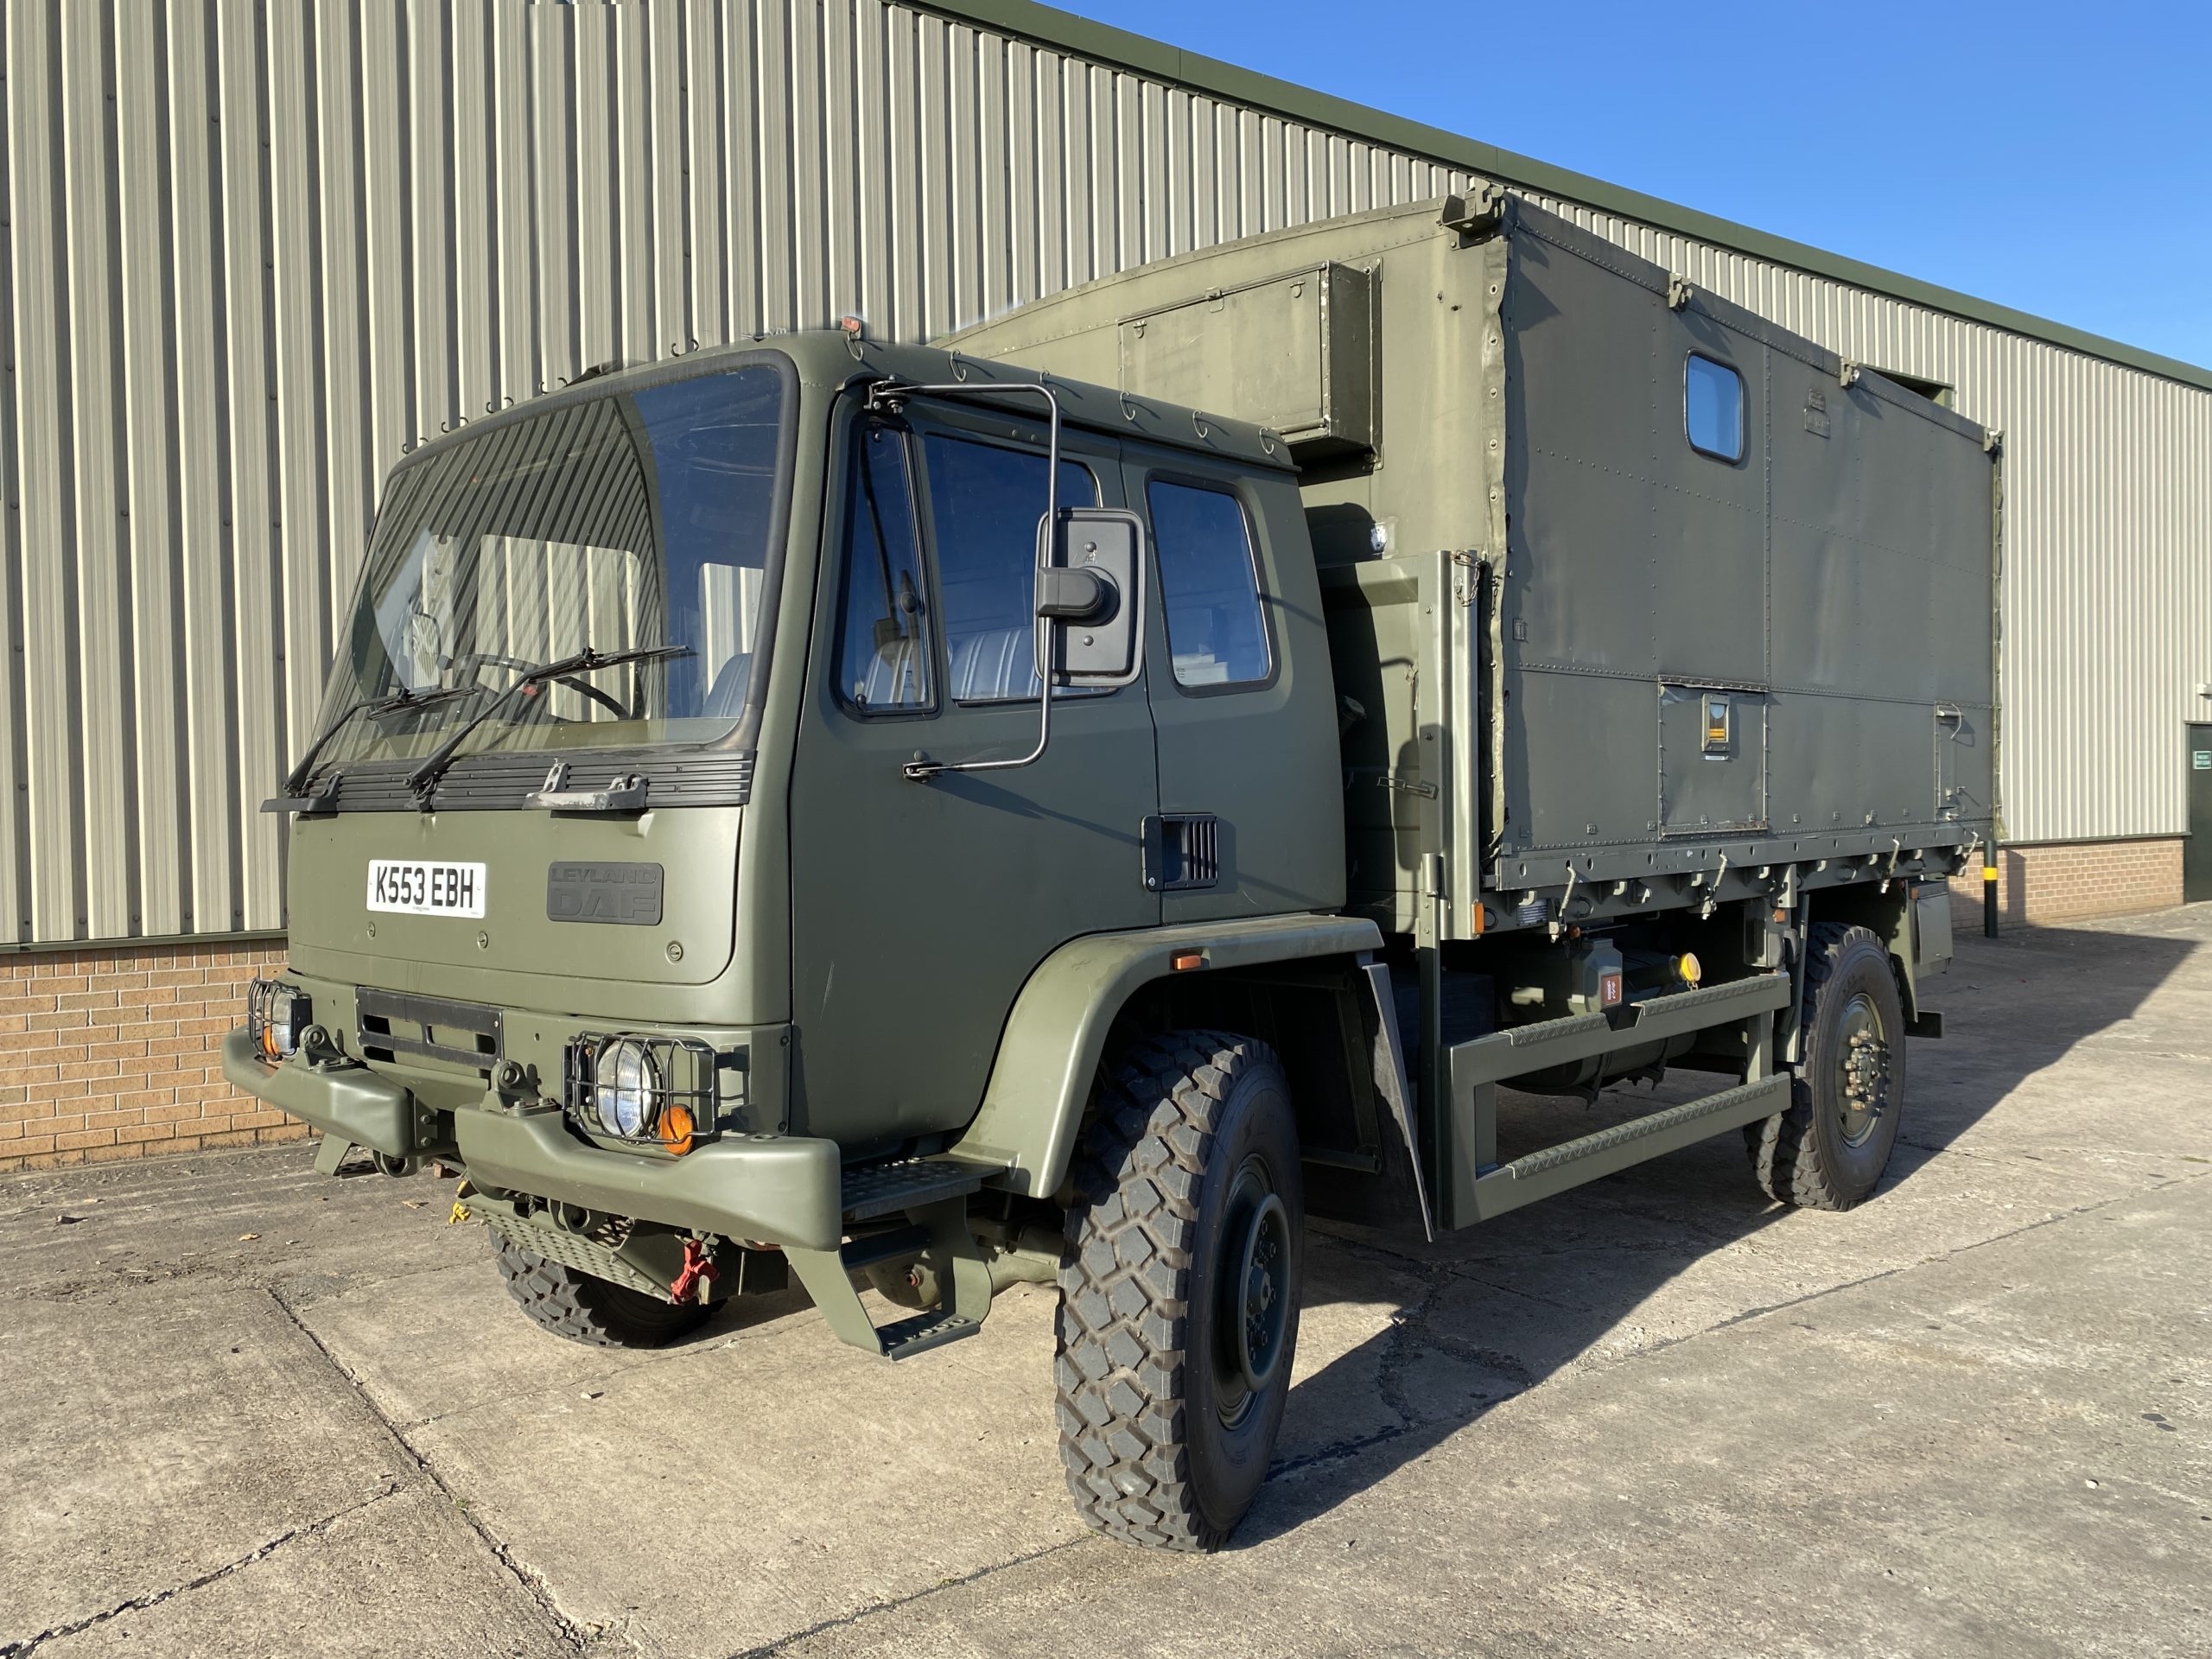 Leyland Daf 4x4 Box Truck Road Registered - Govsales of ex military vehicles for sale, mod surplus